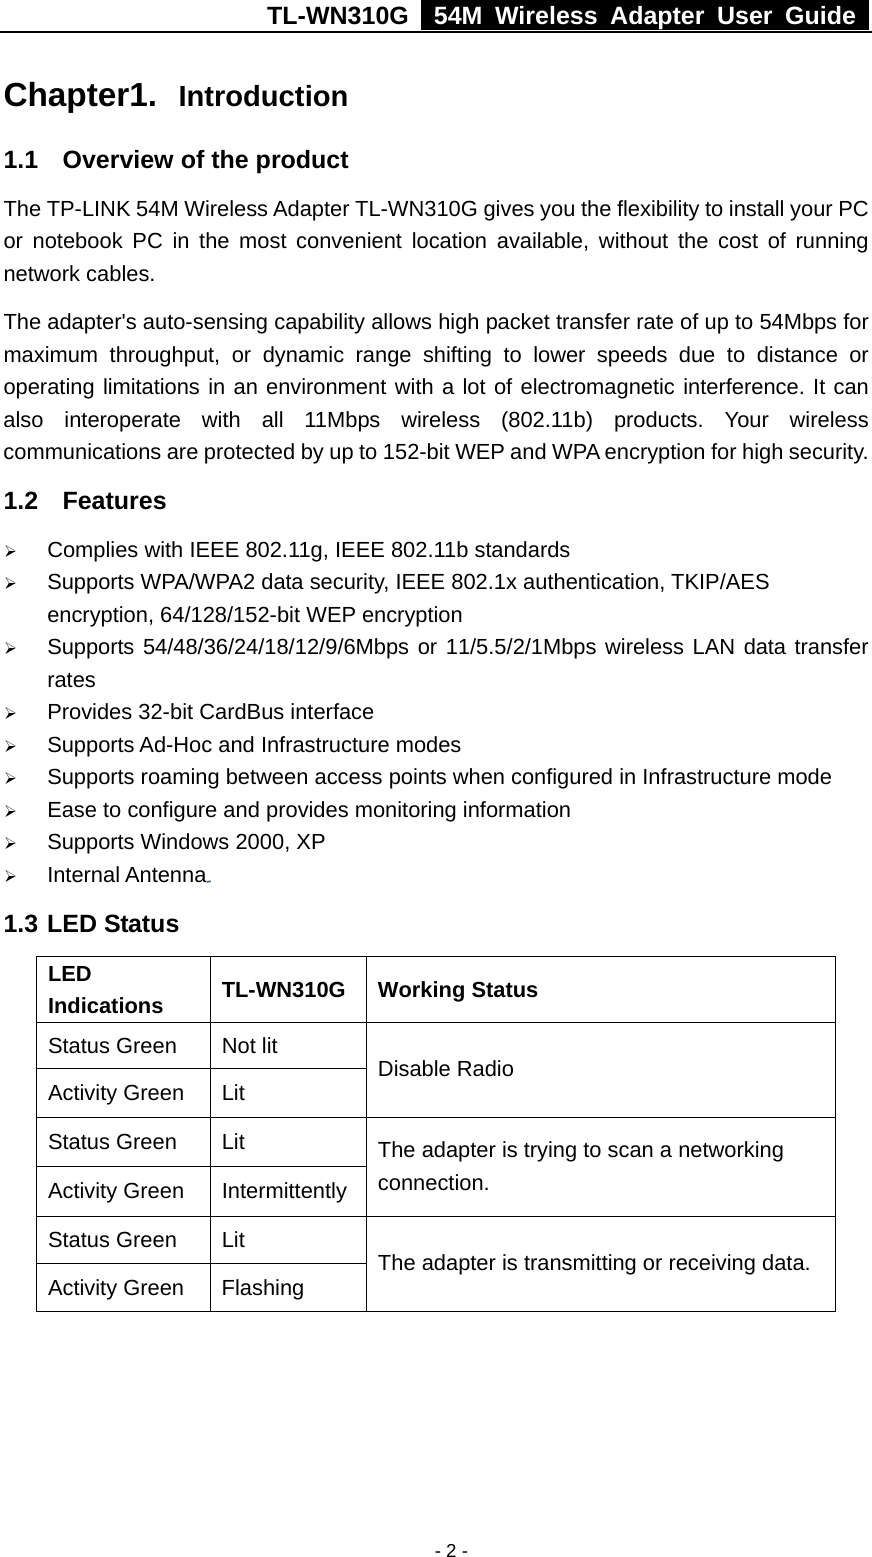 TL-WN310G   54M Wireless Adapter User Guide   - 2 -Chapter1.  Introduction 1.1  Overview of the product The TP-LINK 54M Wireless Adapter TL-WN310G gives you the flexibility to install your PC or notebook PC in the most convenient location available, without the cost of running network cables. The adapter&apos;s auto-sensing capability allows high packet transfer rate of up to 54Mbps for maximum throughput, or dynamic range shifting to lower speeds due to distance or operating limitations in an environment with a lot of electromagnetic interference. It can also interoperate with all 11Mbps wireless (802.11b) products. Your wireless communications are protected by up to 152-bit WEP and WPA encryption for high security. 1.2 Features ¾ Complies with IEEE 802.11g, IEEE 802.11b standards ¾ Supports WPA/WPA2 data security, IEEE 802.1x authentication, TKIP/AES encryption, 64/128/152-bit WEP encryption ¾ Supports 54/48/36/24/18/12/9/6Mbps or 11/5.5/2/1Mbps wireless LAN data transfer rates ¾ Provides 32-bit CardBus interface ¾ Supports Ad-Hoc and Infrastructure modes ¾ Supports roaming between access points when configured in Infrastructure mode ¾ Ease to configure and provides monitoring information ¾ Supports Windows 2000, XP ¾ Internal Antenna  1.3 LED Status LED Indications  TL-WN310G Working Status Status Green  Not lit Activity Green  Lit  Disable Radio Status Green  Lit Activity Green  Intermittently The adapter is trying to scan a networking connection. Status Green  Lit Activity Green  Flashing  The adapter is transmitting or receiving data. 